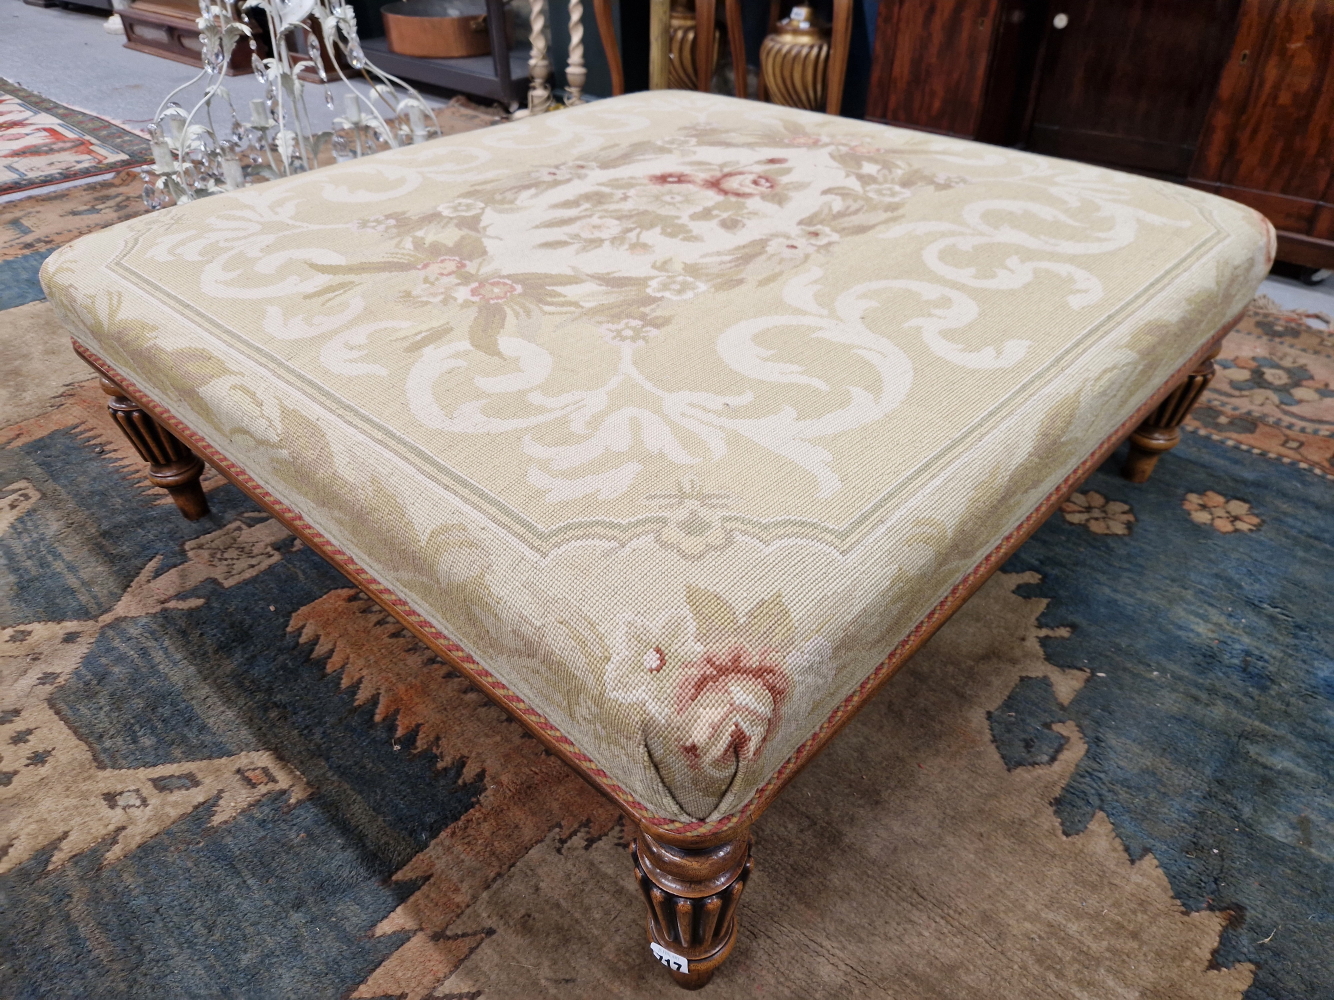 A LATE VICTORIAN STYLE MAHOGANY OTTOMAN, THE SQUARE FLORAL NEEDLE WORKED SEAT ON REEDED CYLINDRICAL